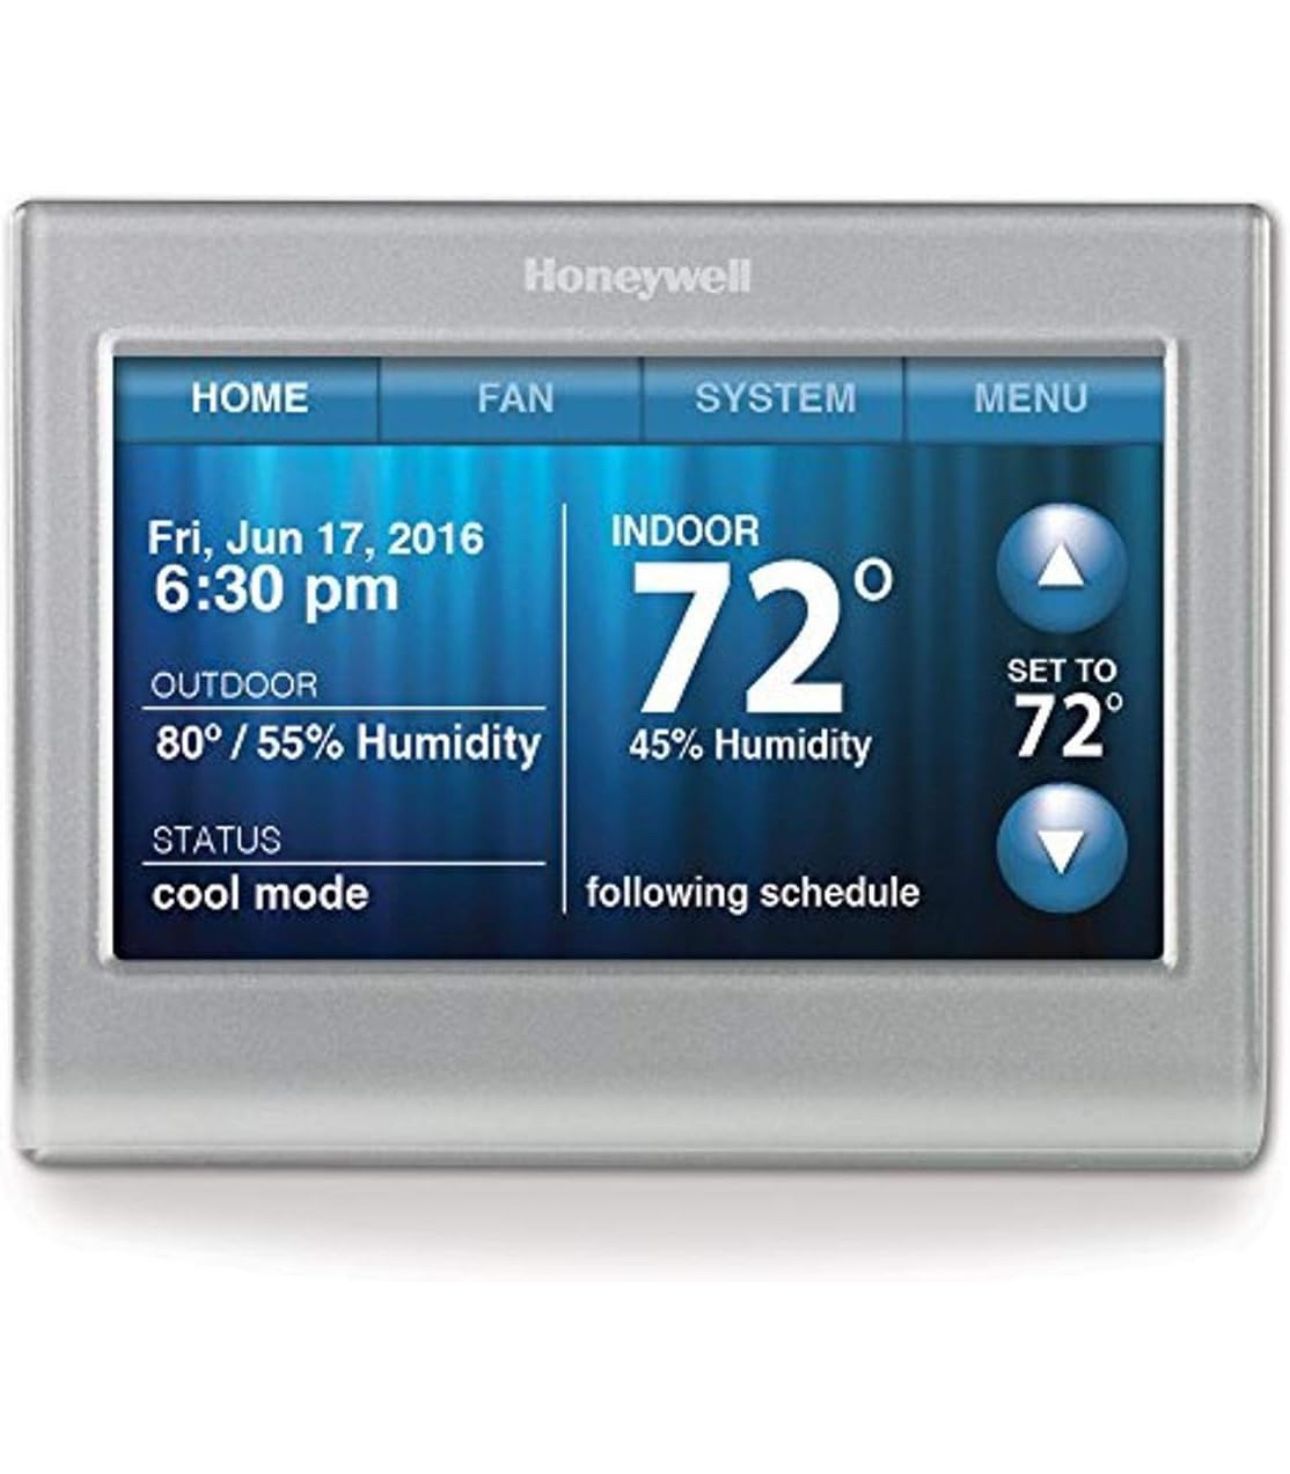 Honeywell RTH9580WF Wi-Fi Smart Thermostat - For Air Conditioner